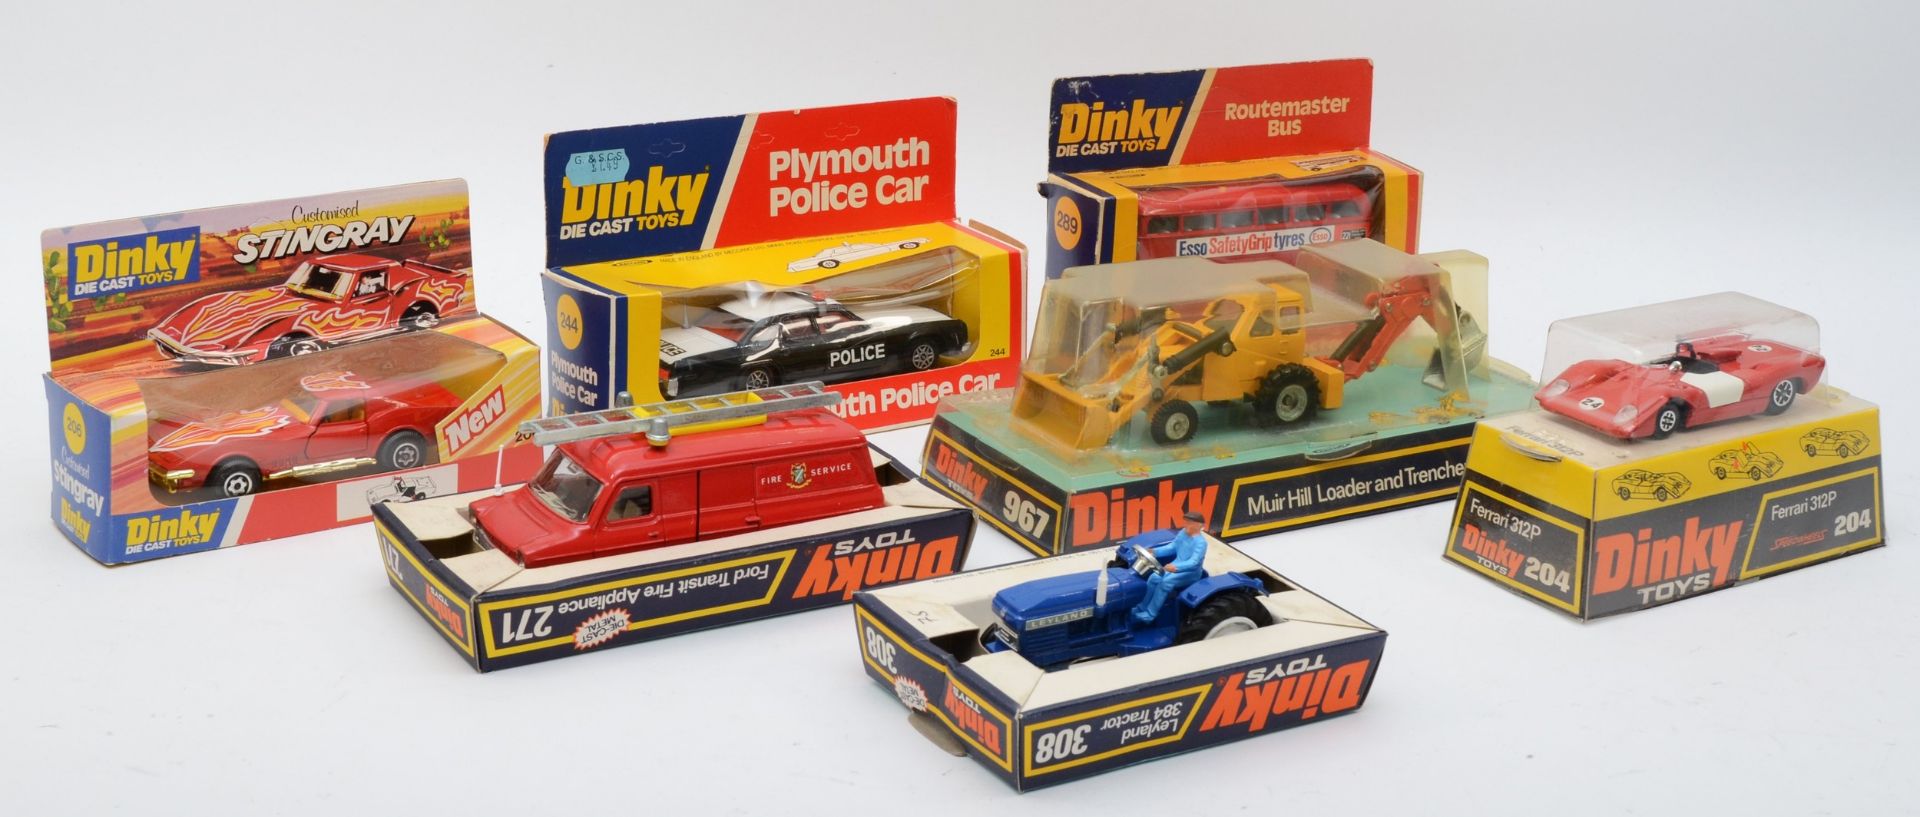 Dinky Toys - A collection of Dinky diecast model toys, circa 1970s, to include Routemaster bus No.